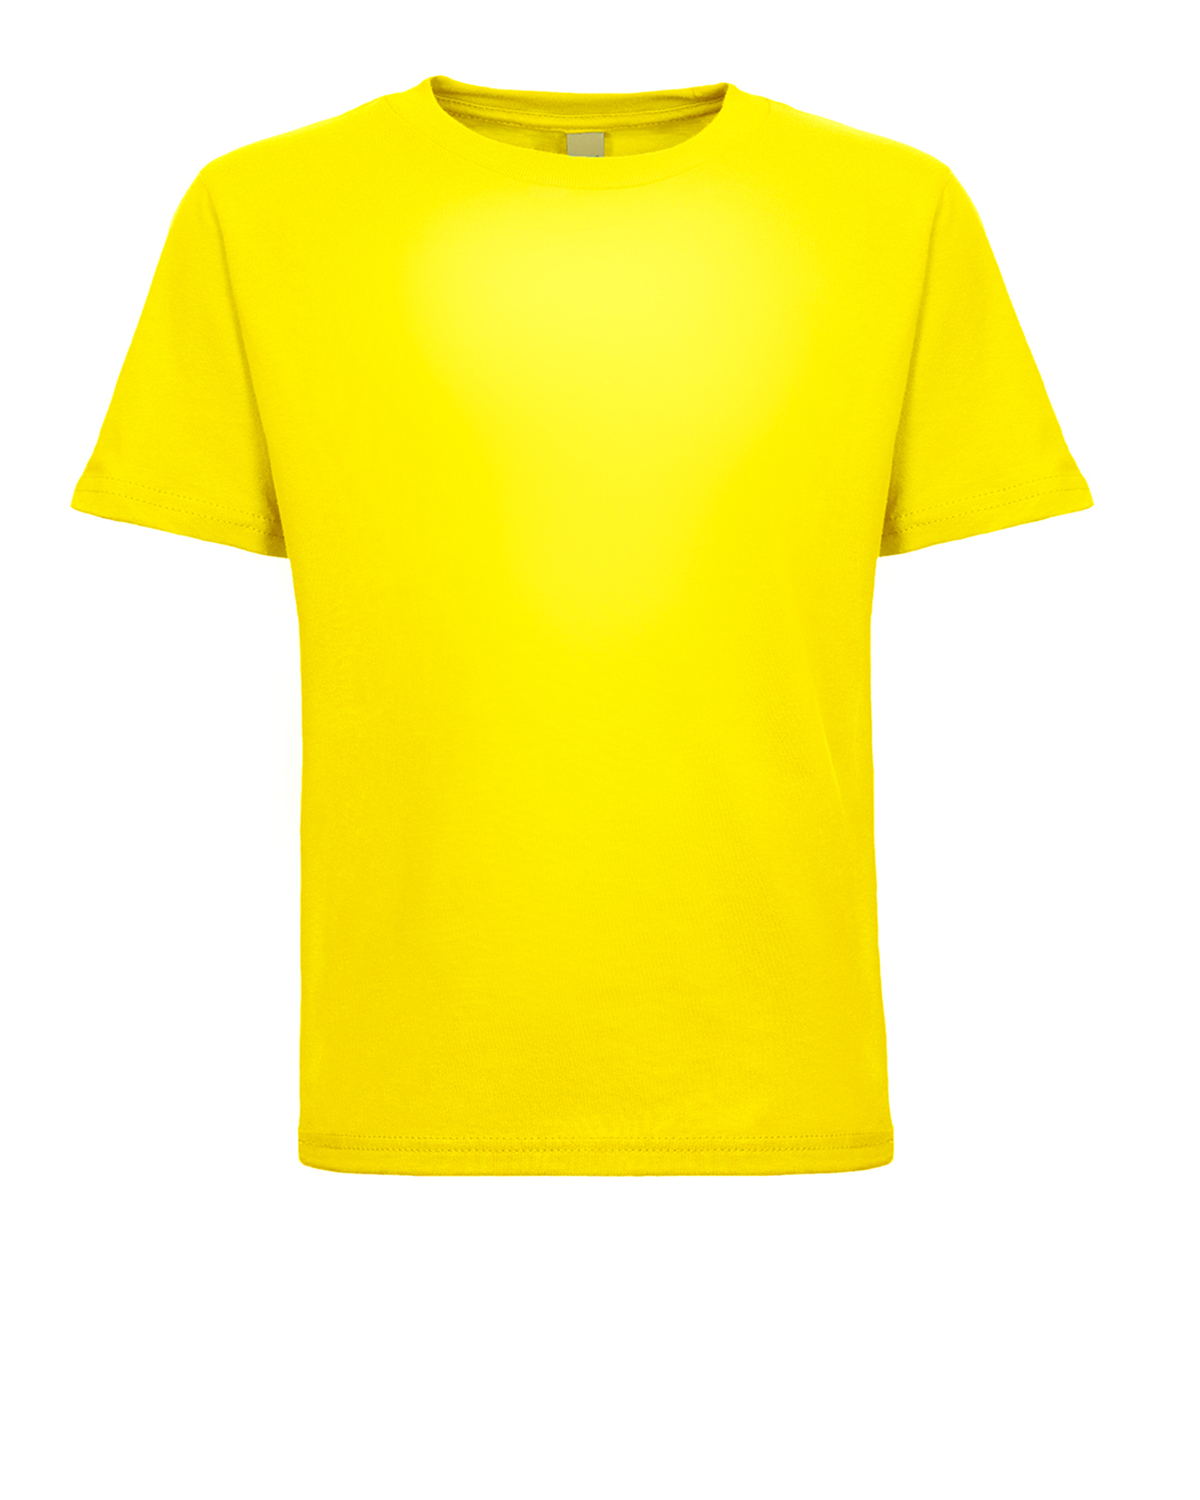 click to view Vibrant Yellow